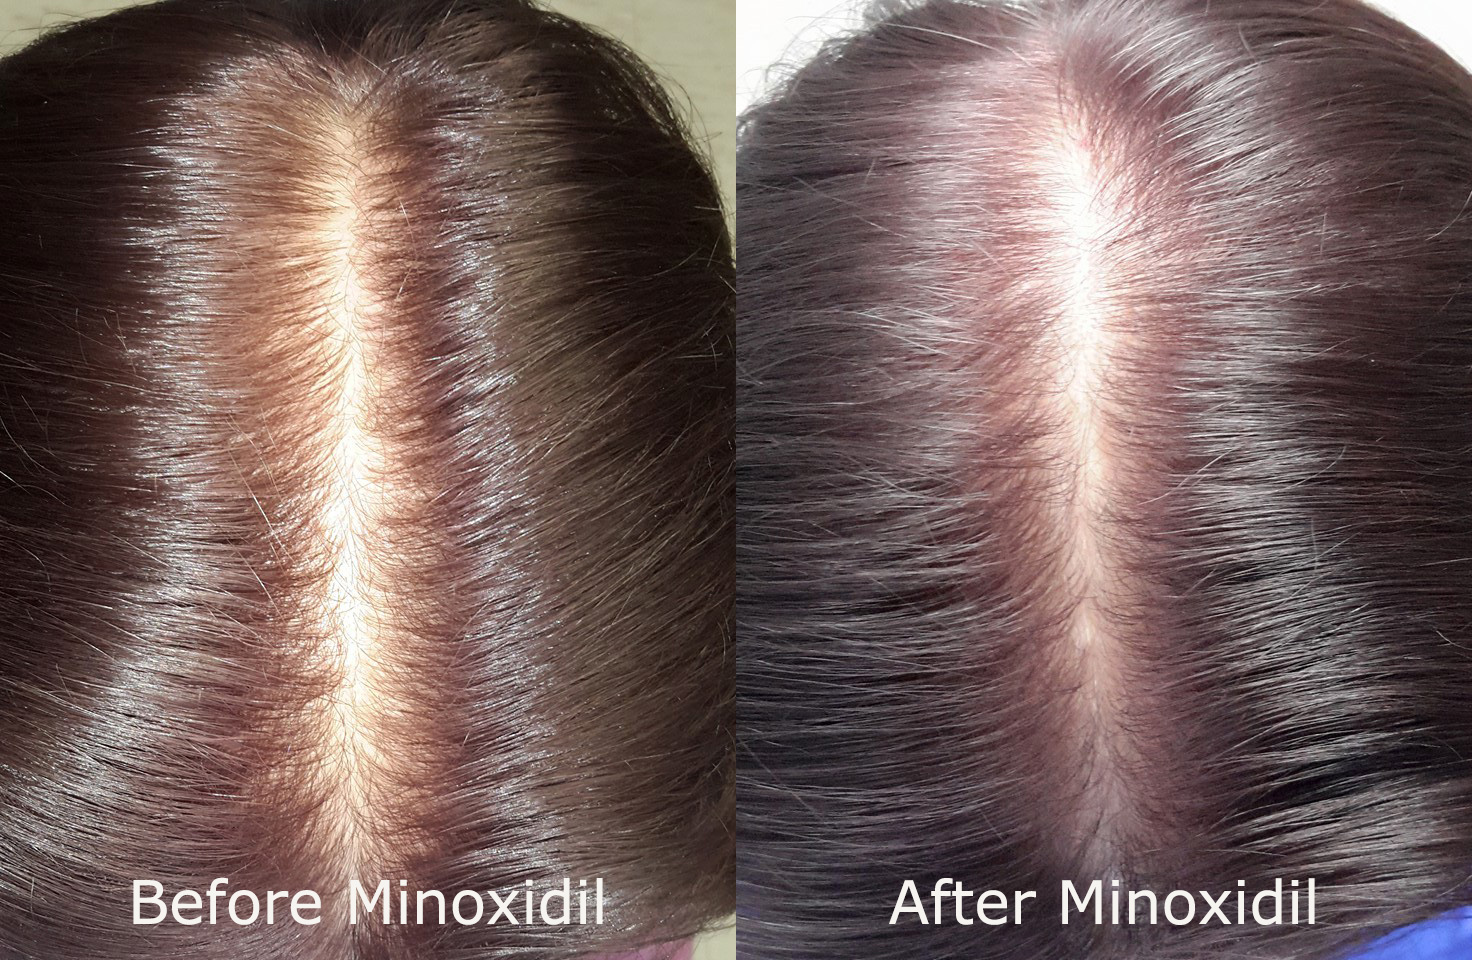 Can Rogaine Minoxidil Make Hair Loss Worse Limmer HTC